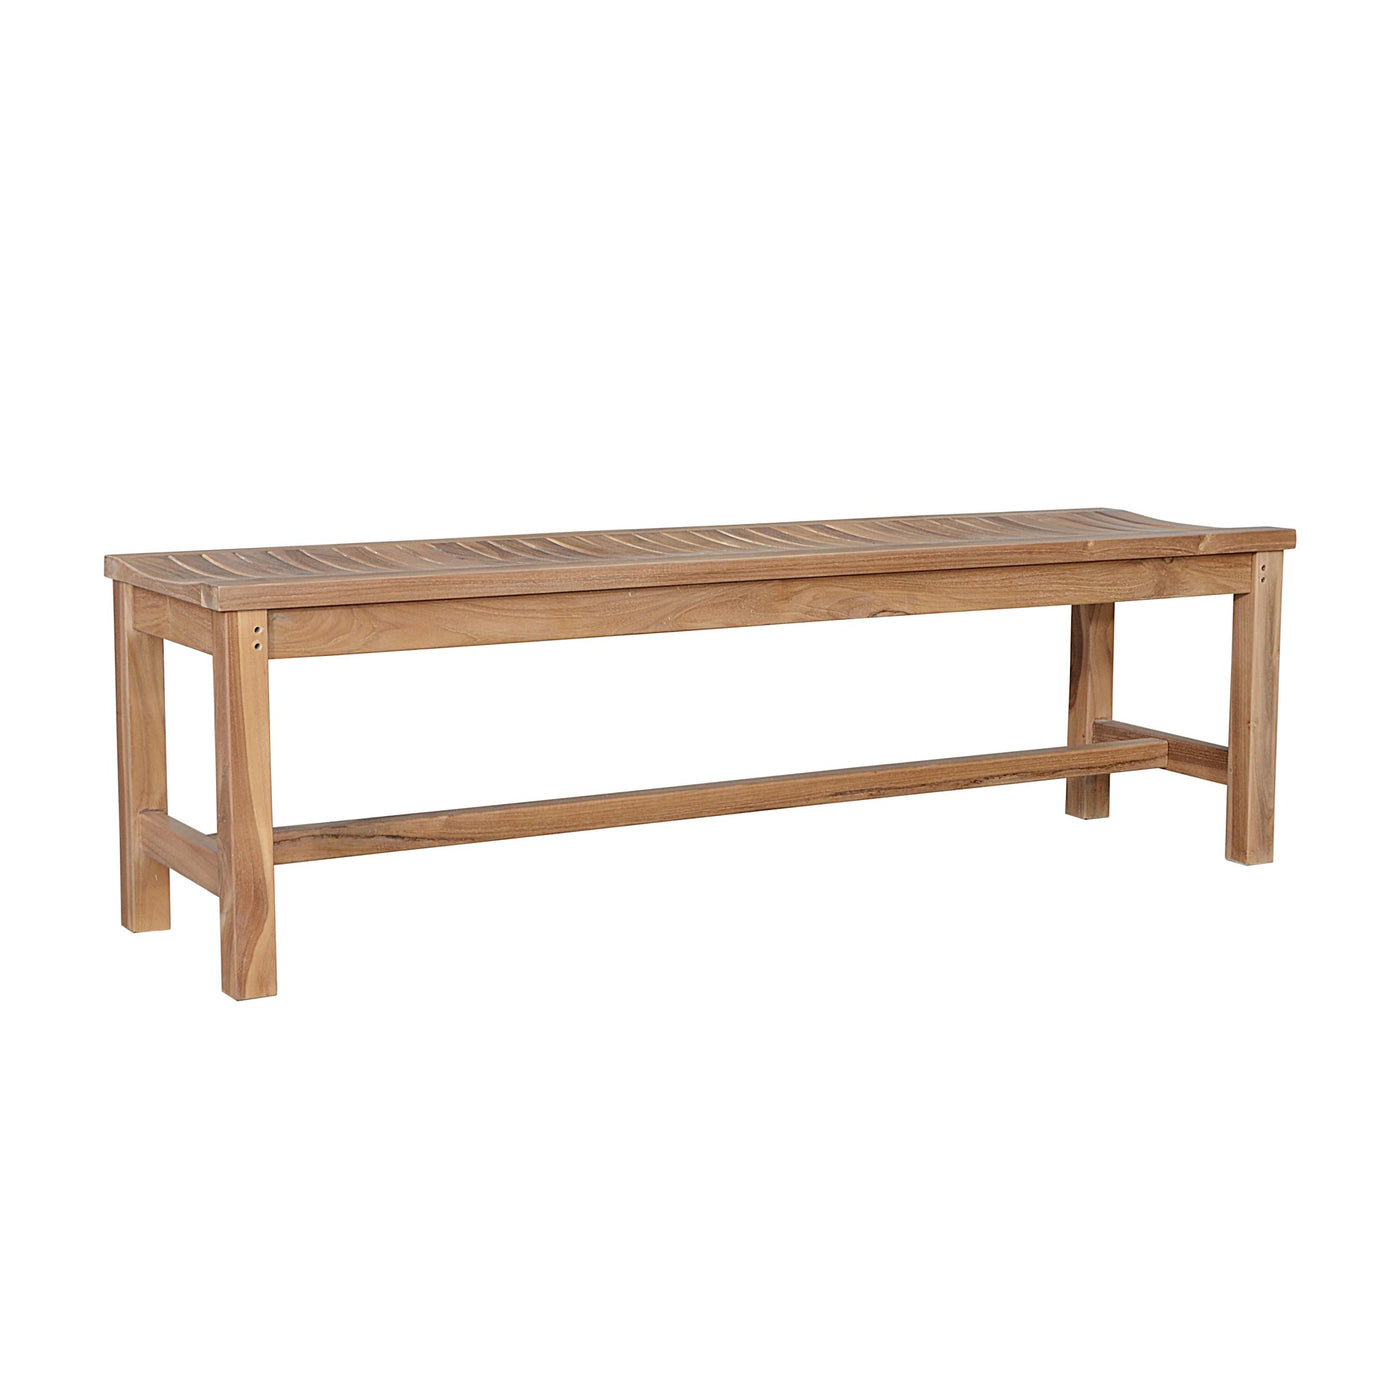 Madison 59" Backless Bench